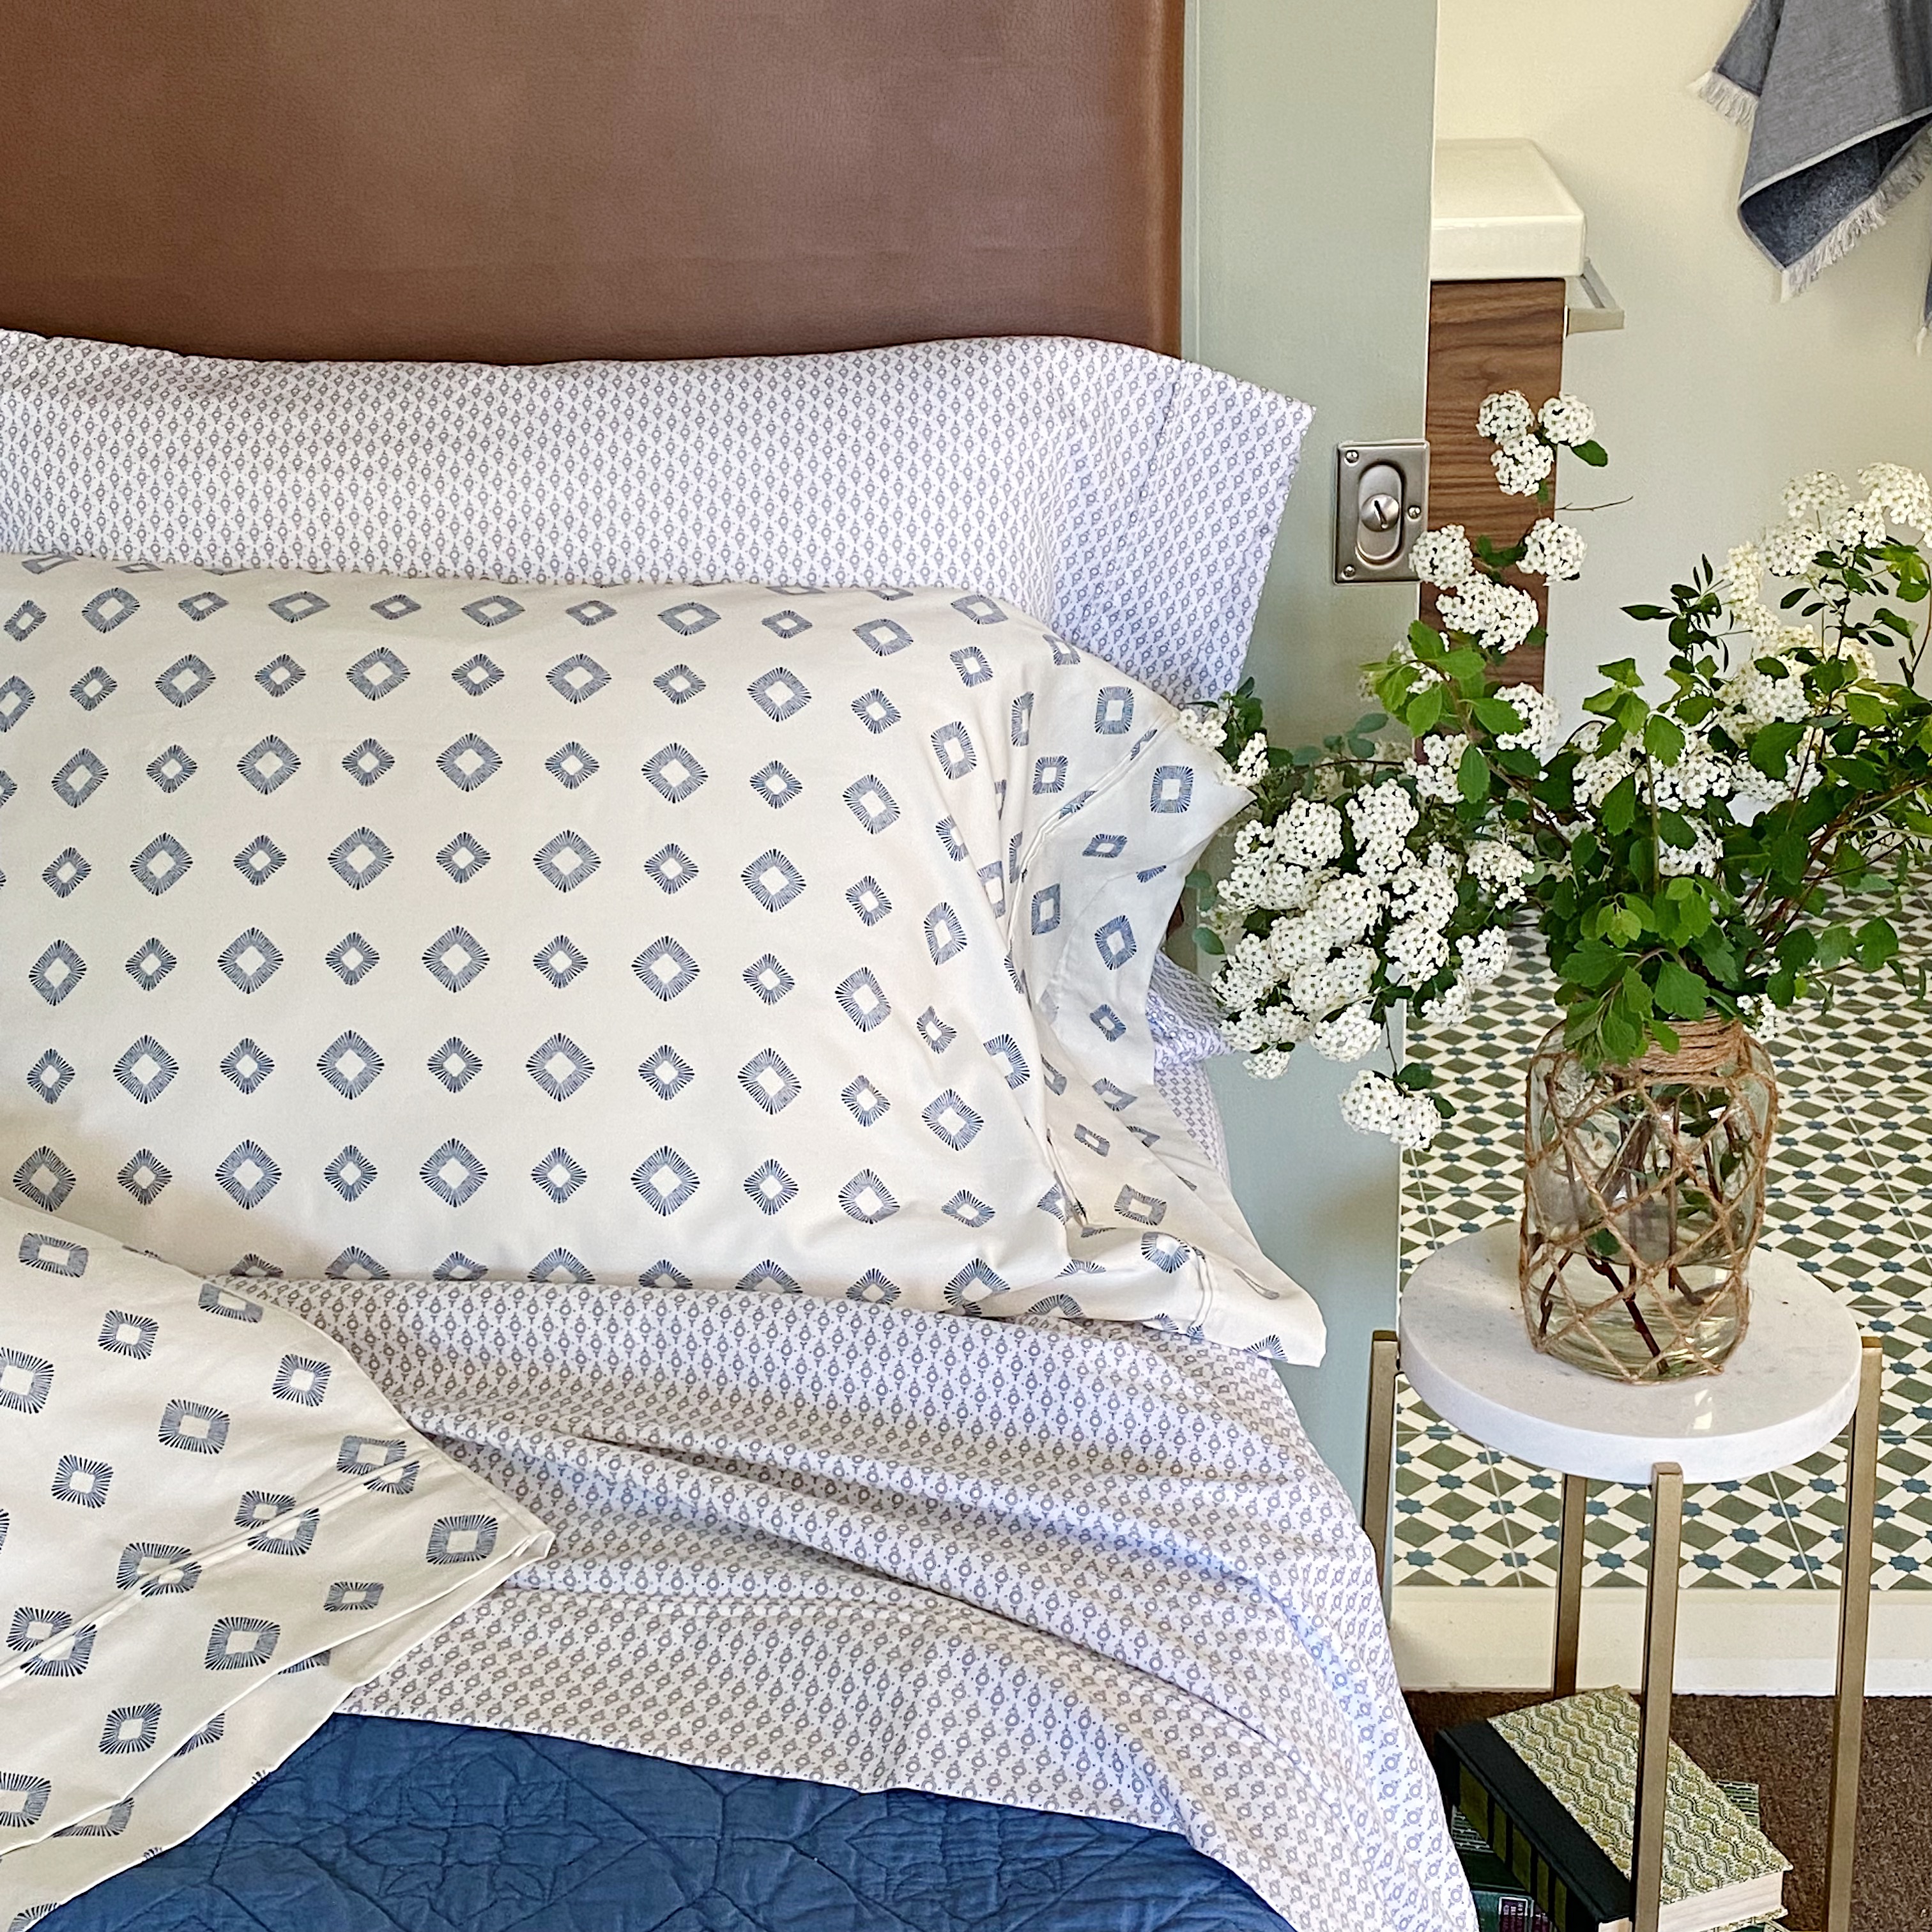 ditsy print sheets and pillows with leather headboard and flowers in vase